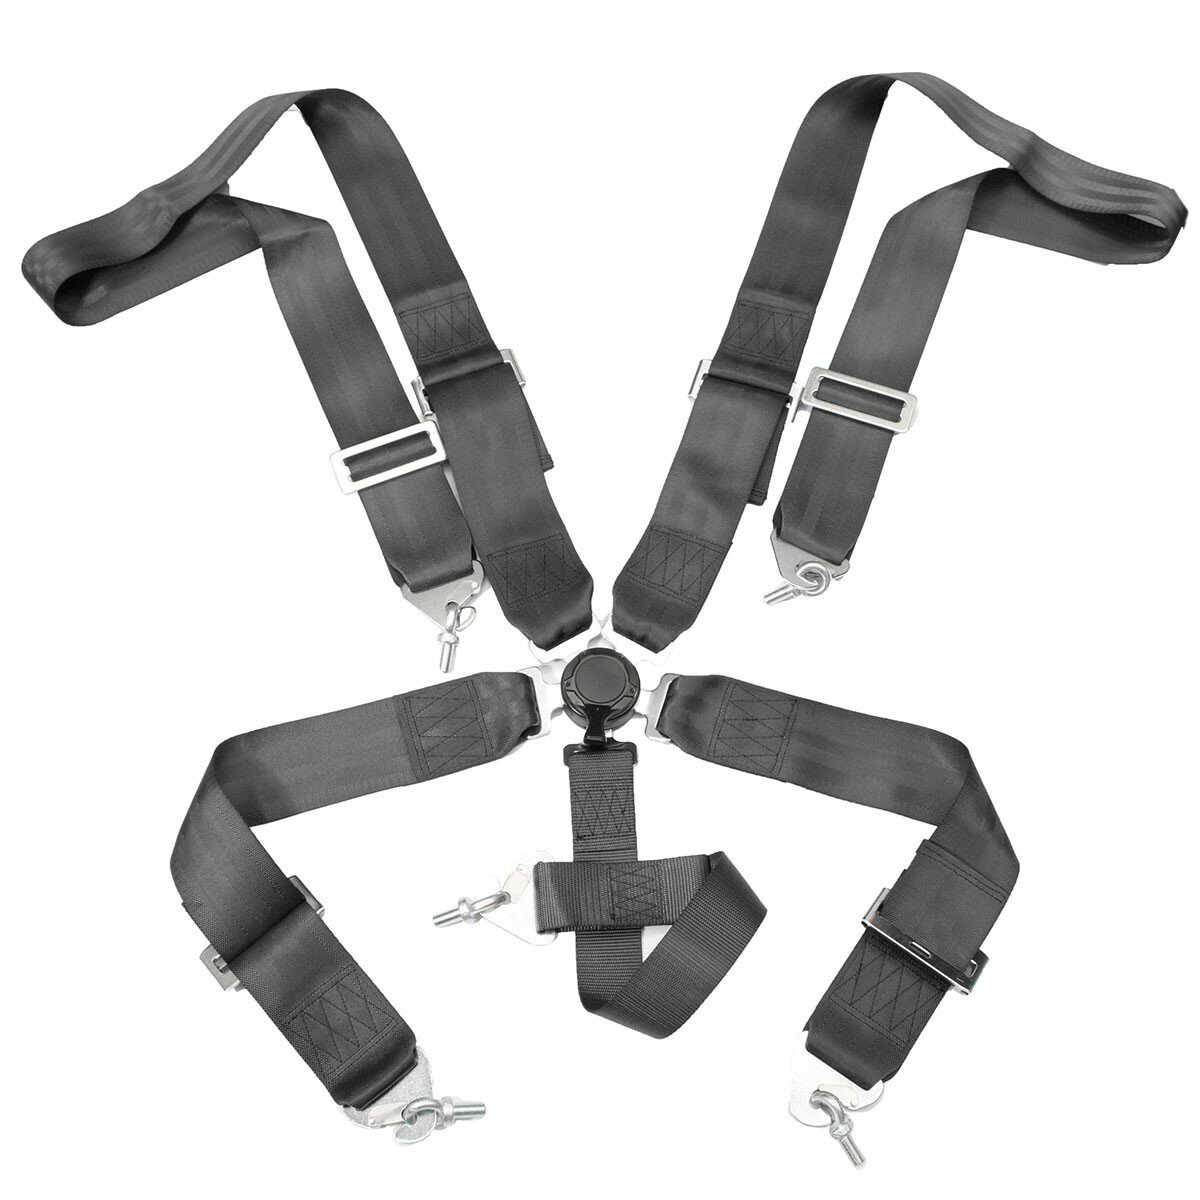 4-POINT 2/" BLACK NYLON STRAP HARNESS SAFETY BUCKLE RACING SEAT BELT